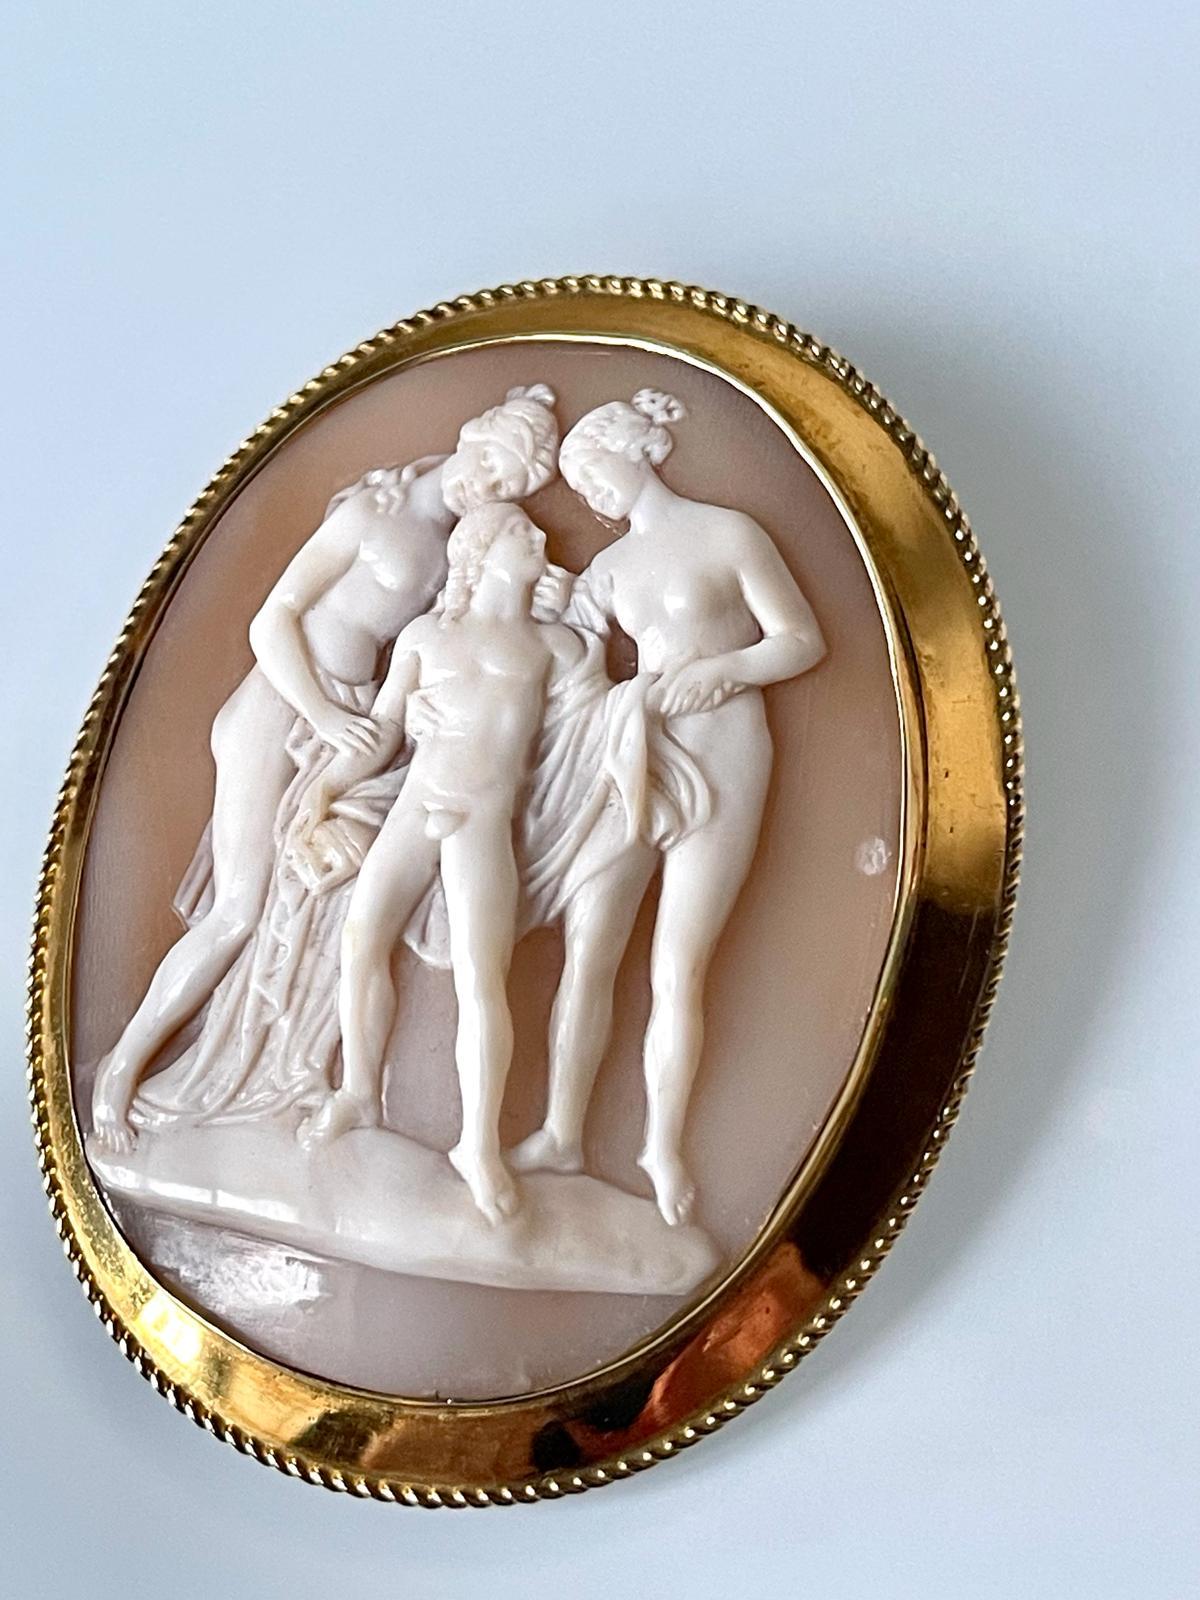 A fine English shell cameo from C 1860 depicting an erotic seduction scene (the naked female figures are, possibly, Aphrodite and Eros, known for their erotic beauty and sexuality, and both had relationships with mortal lovers). Skillfully carved,